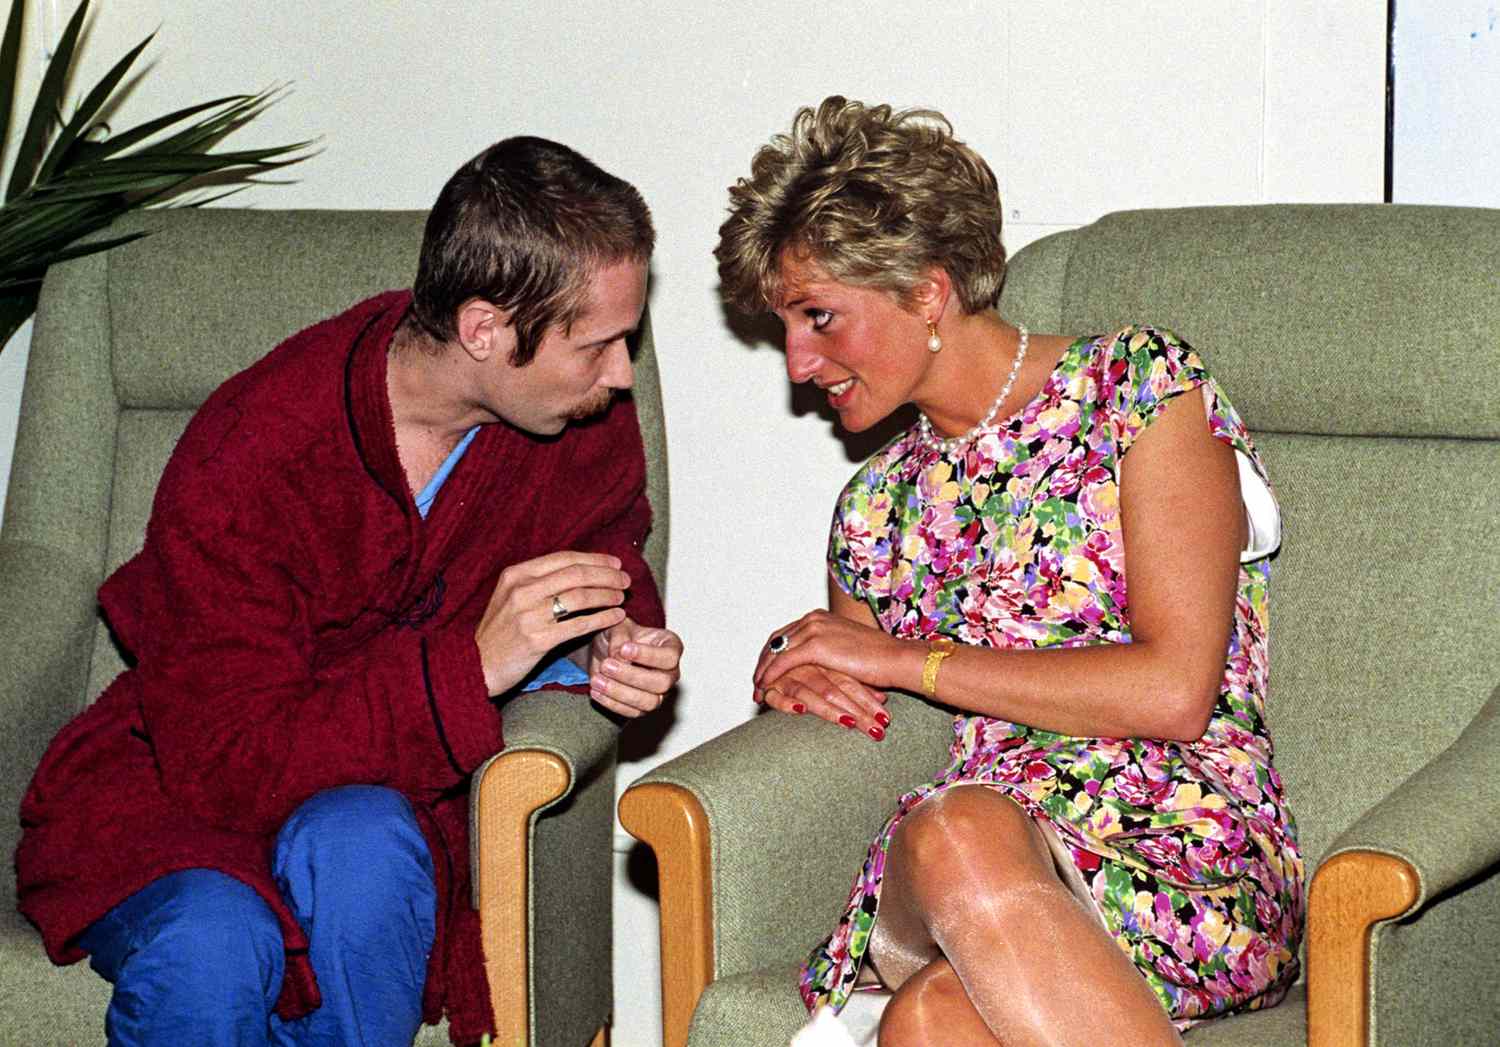 Princess Diana, wearing a floral dress and pearl jewellery, sits in a green armchair next to a man who is wearing a red dressing gown. They are both leaning towards each other, looking into each other eyes engaged in conversation